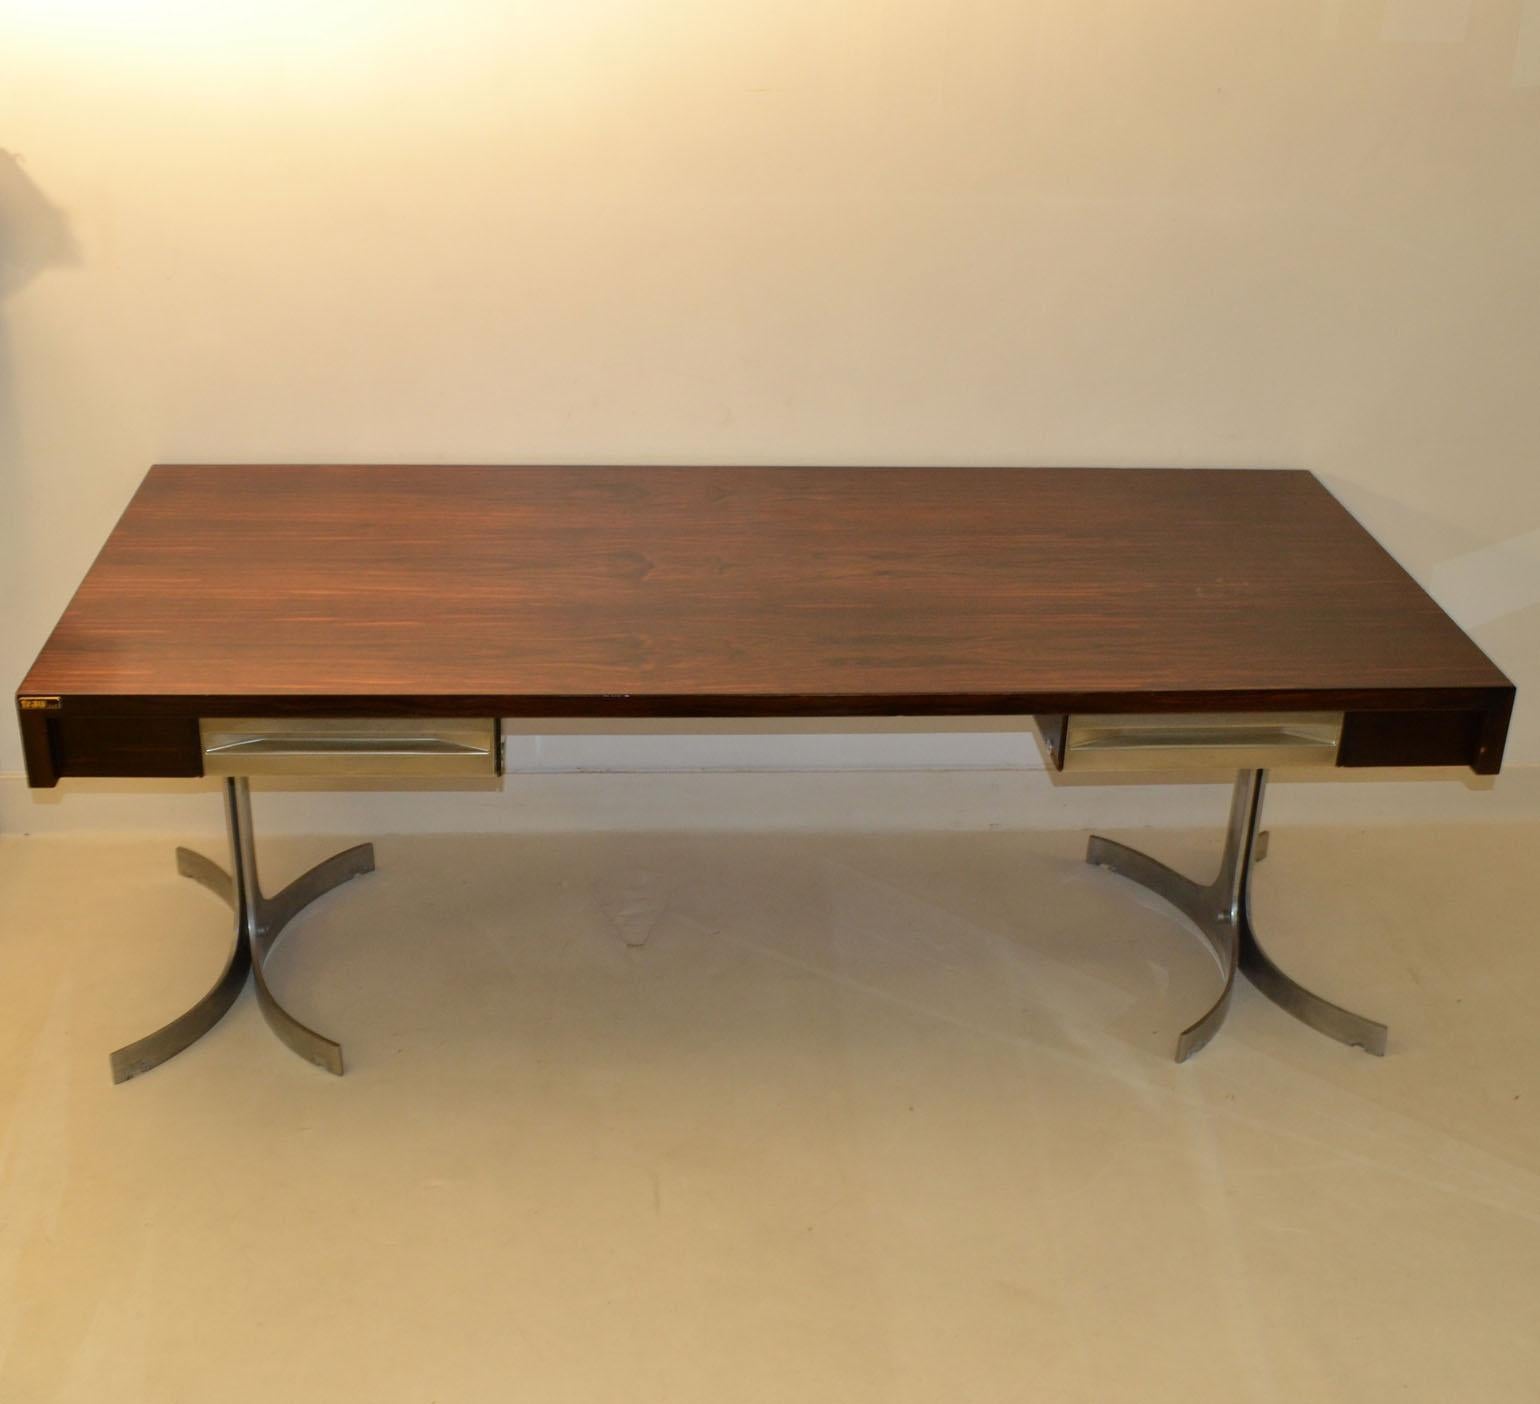 Large Executive Desk by Trau, Italian 1960s, Wooden Top on Curved Metal Legs 1